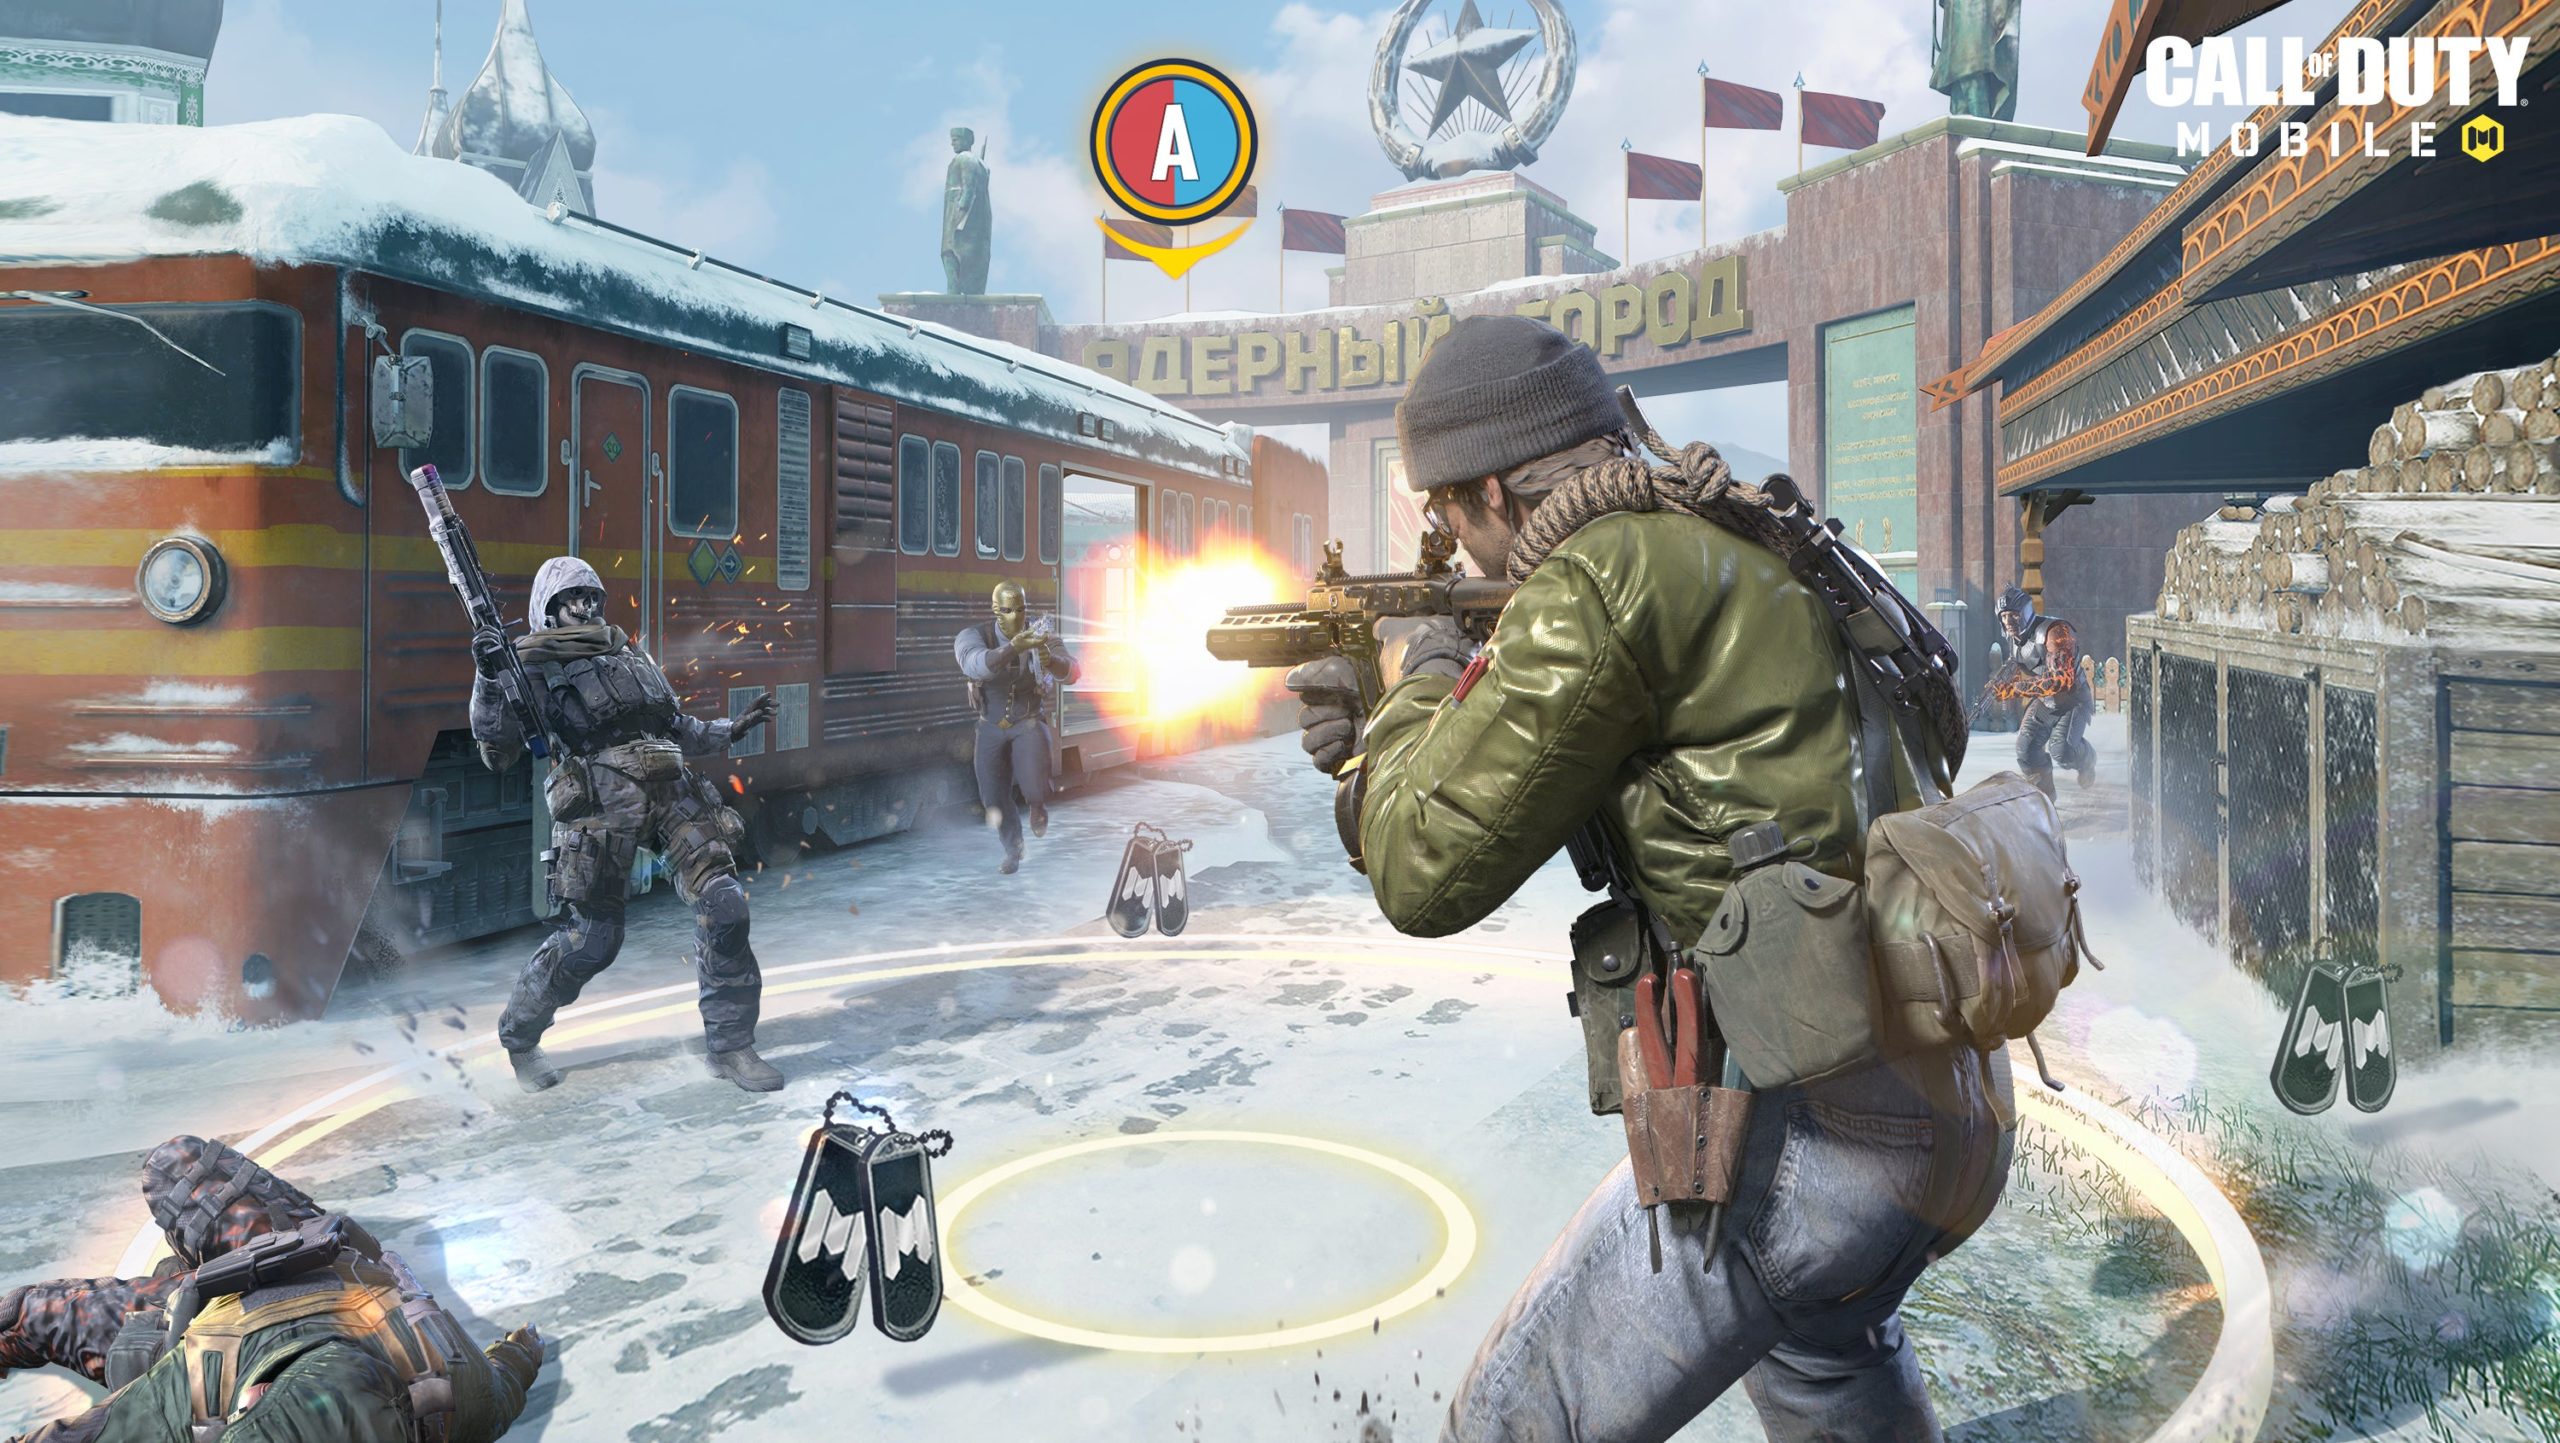 Microsoft expects Call of Duty Mobile to be 'phased out' for Warzone Mobile